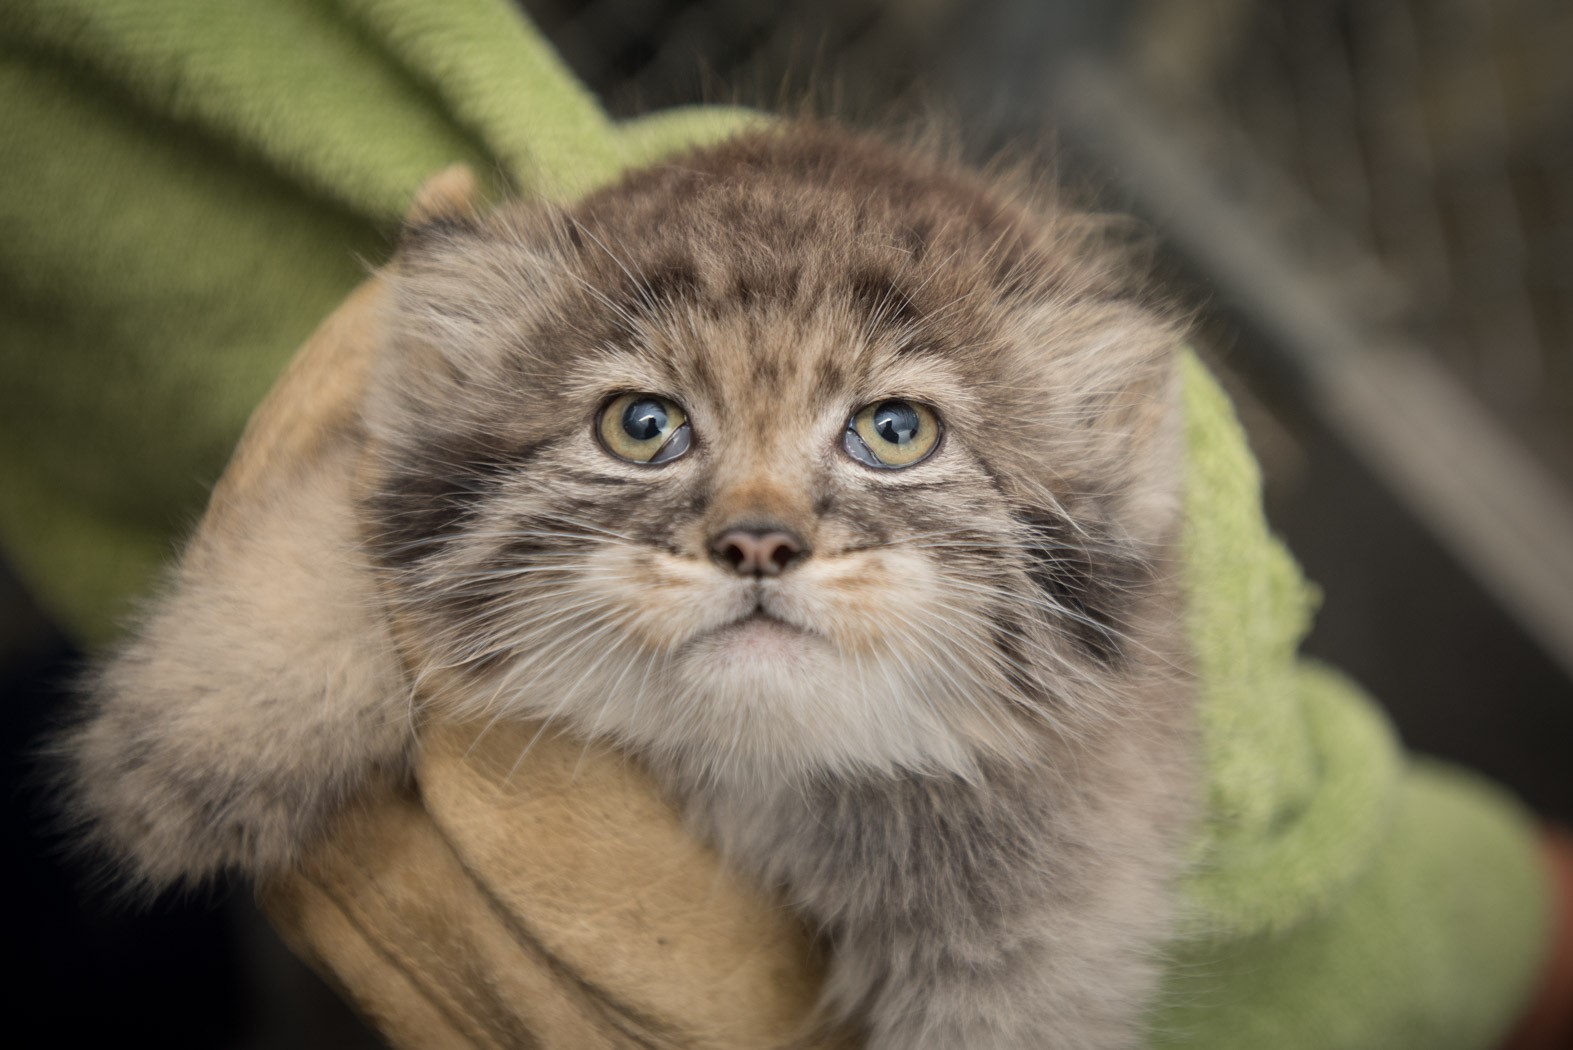 Pallas' cat kitten produced by artificial insemination performed by CREW scientists (Photo: Columbus Zoo & Aquarium)